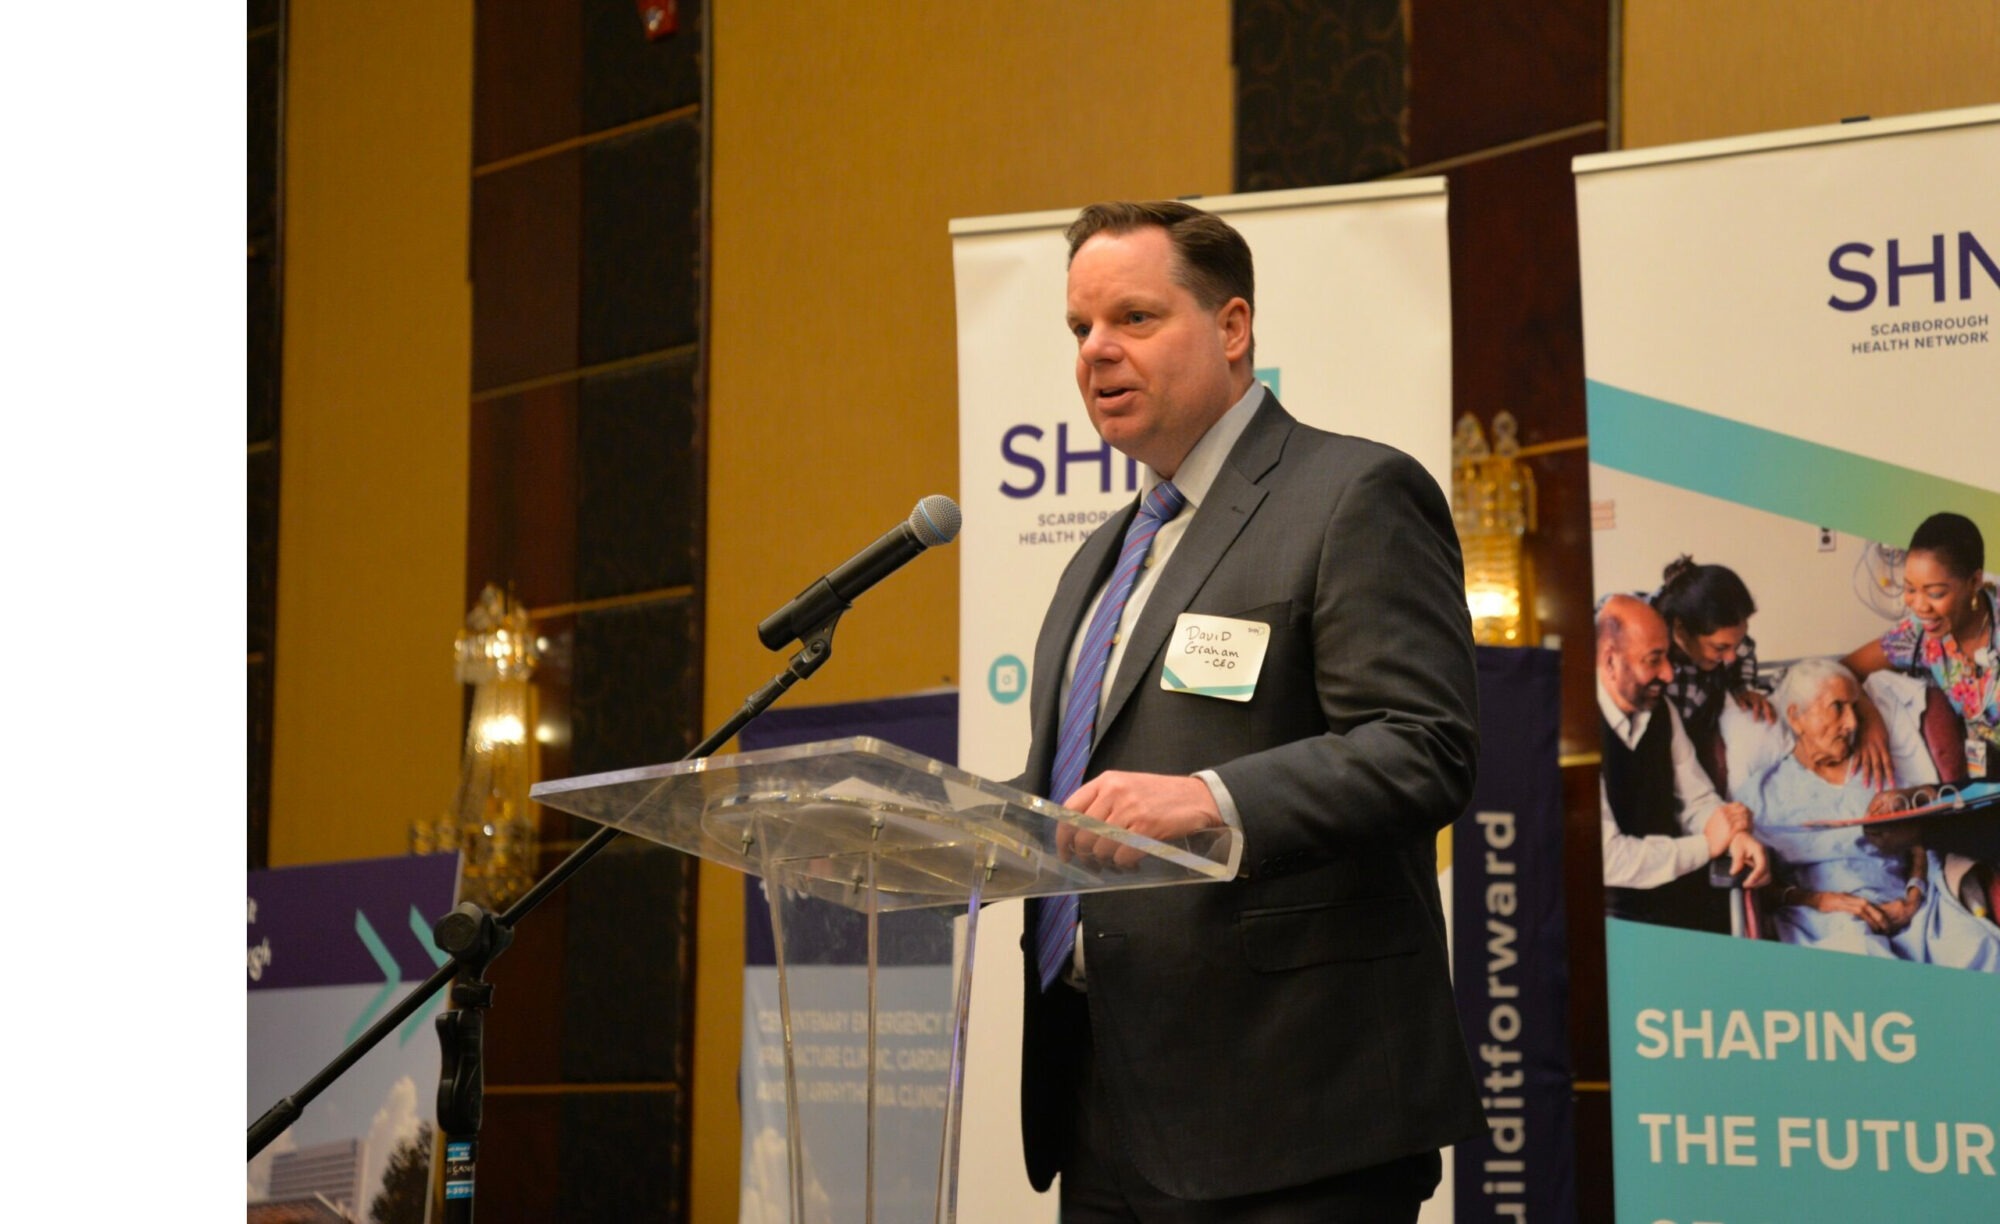 SHN President and CEO David Graham welcomes participants to the Birchmount Redevelopment Community Forum on March 8, 2023.